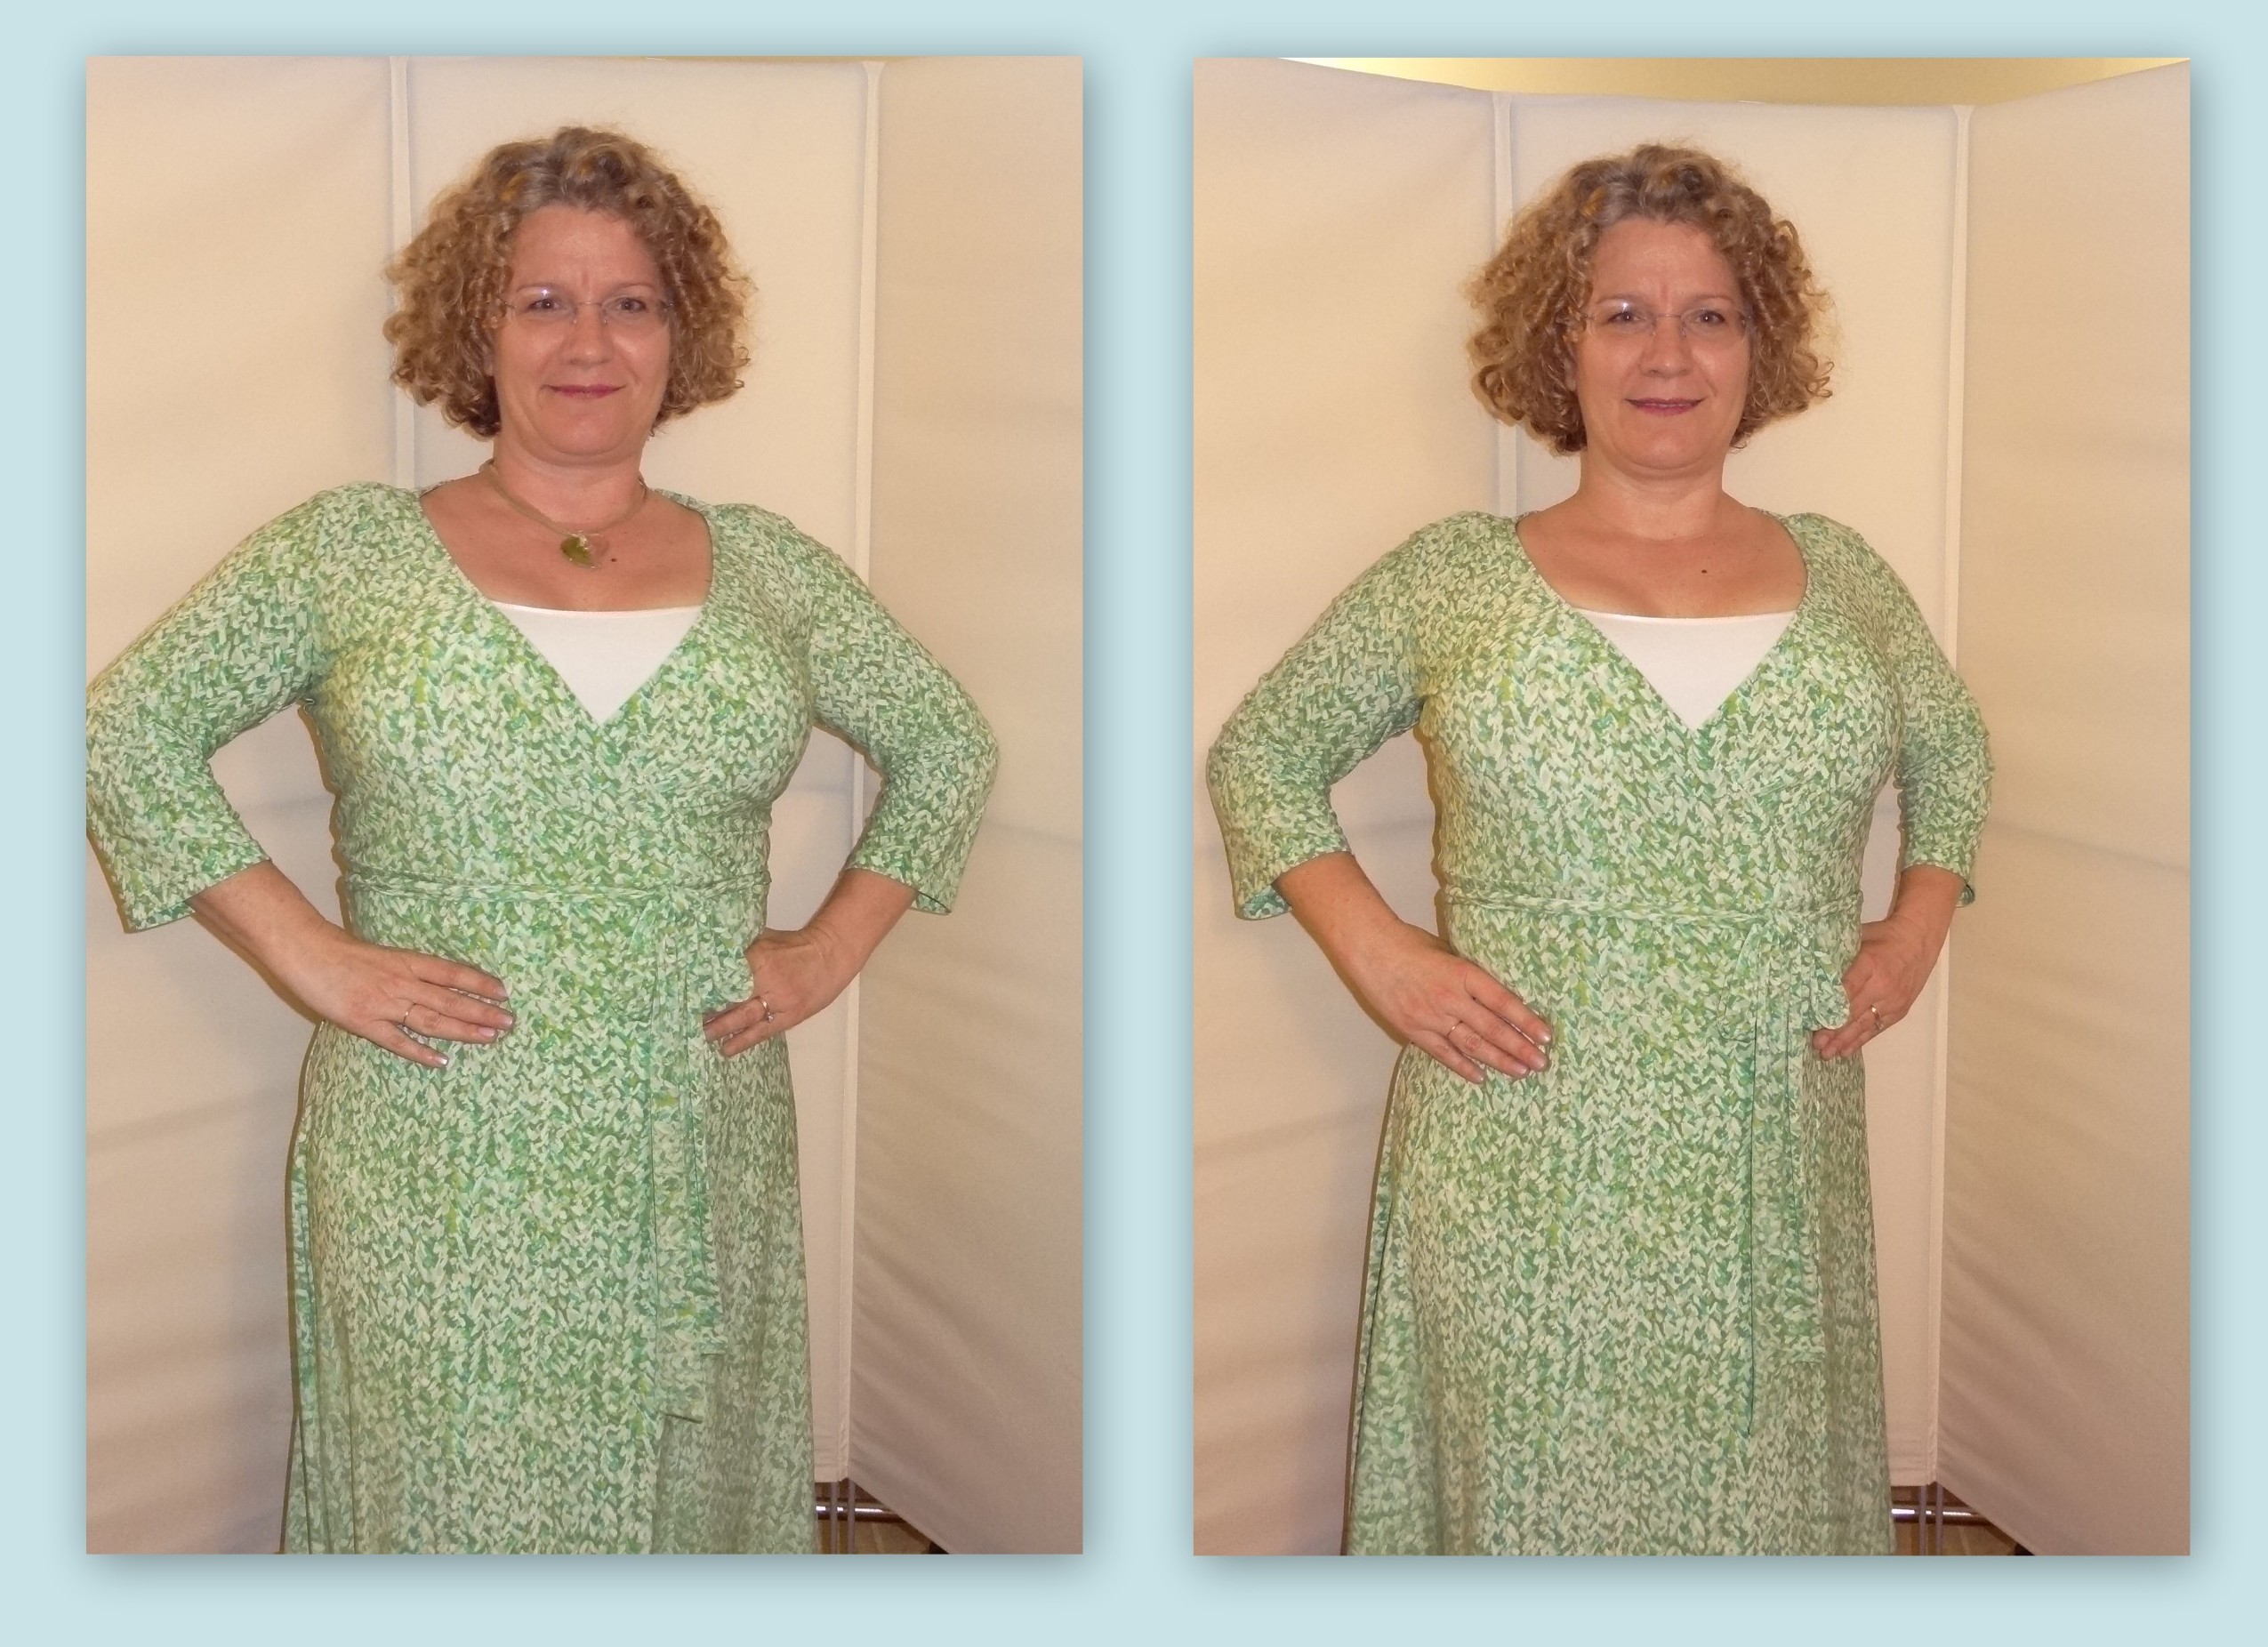 https://hourglassy.com/wp-content/uploads/2012/08/green-busty-wrap-dress-with-and-without-necklace.jpg